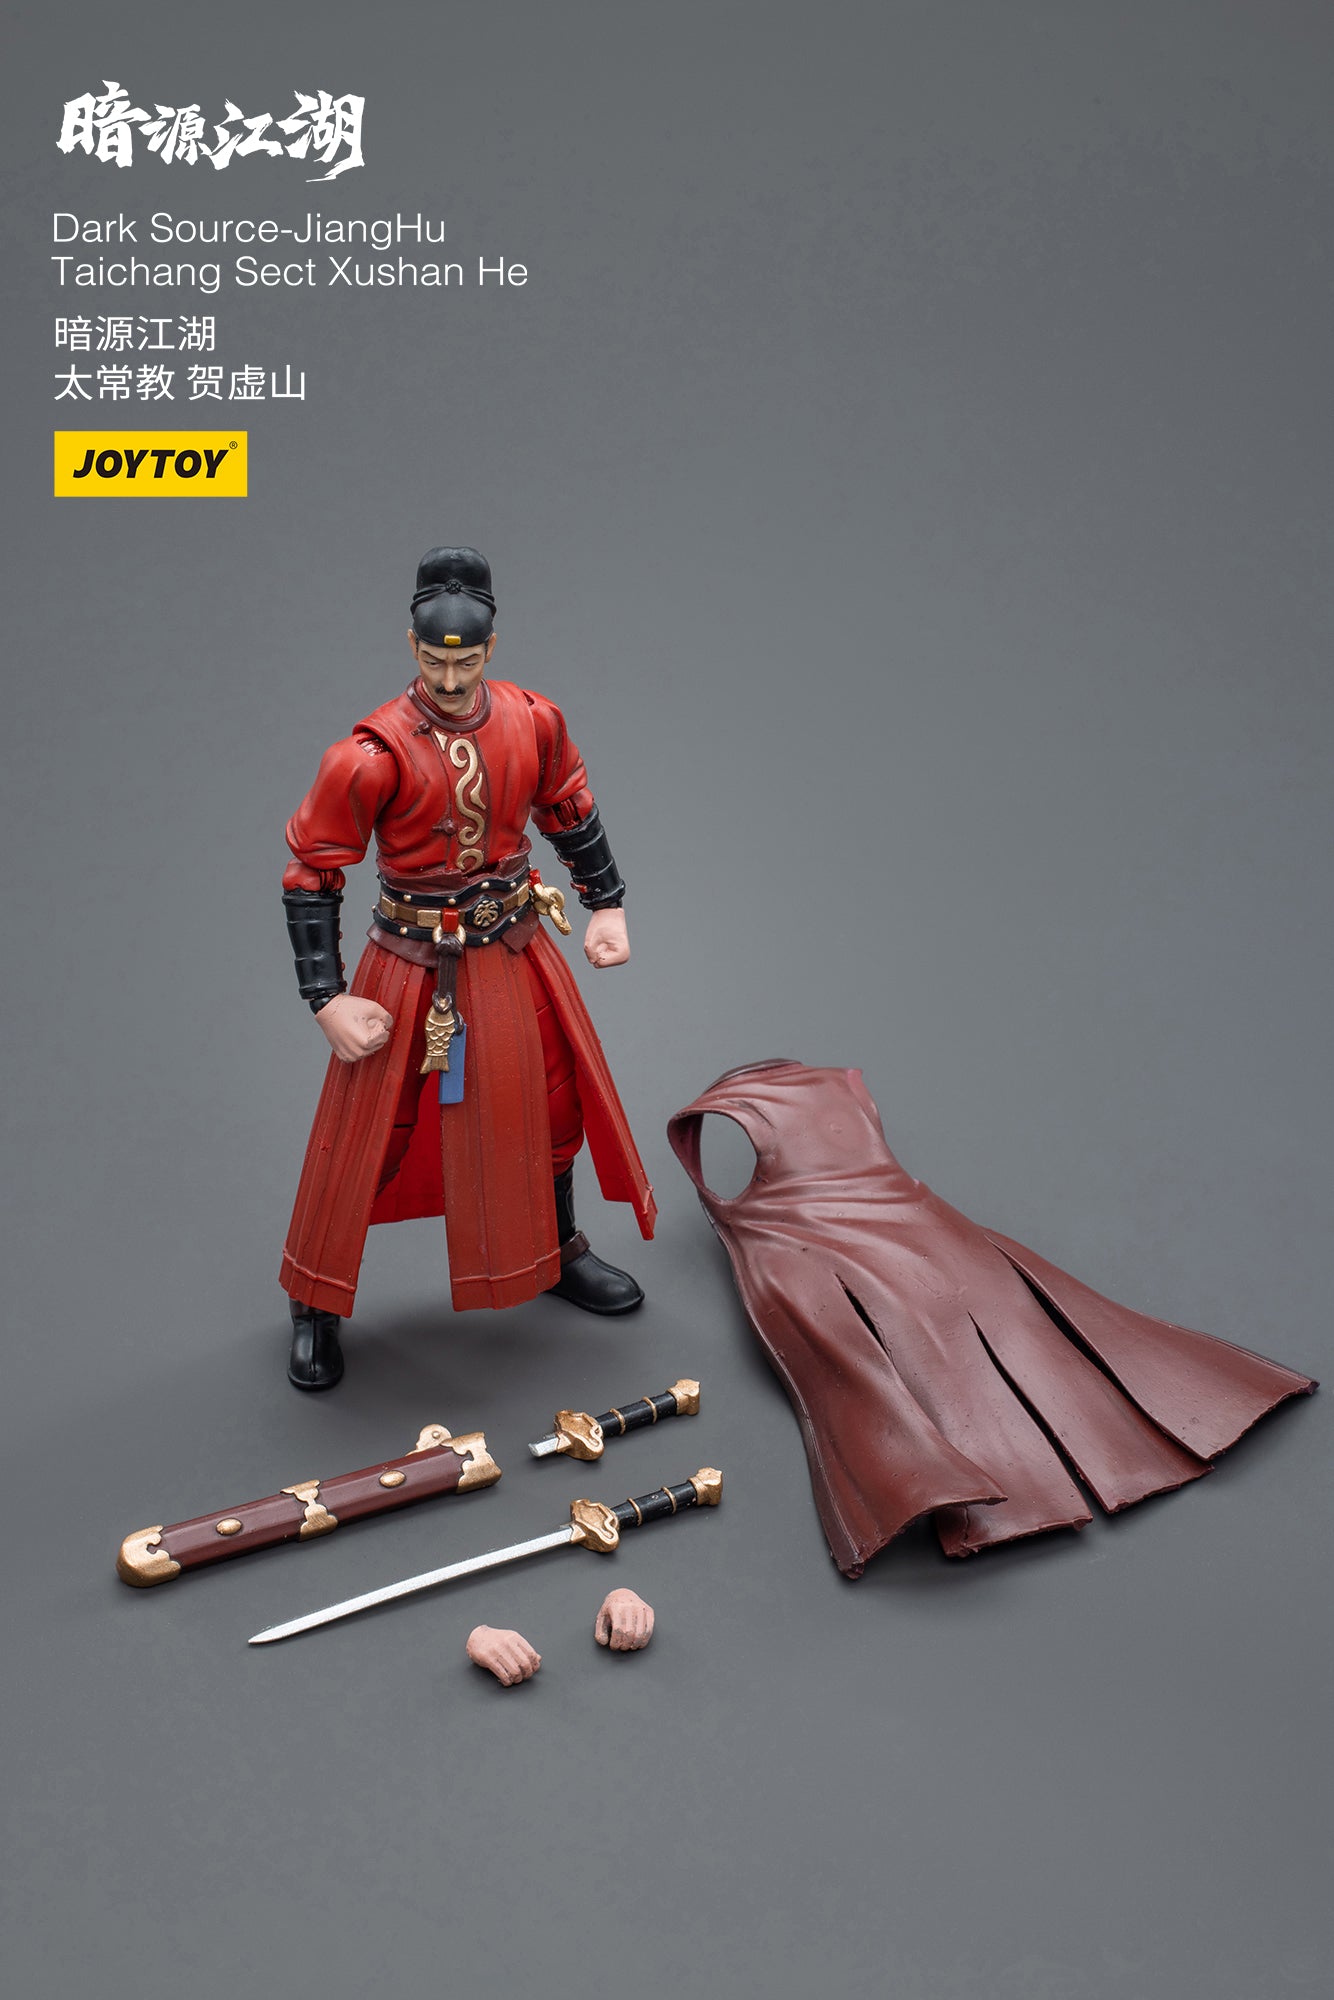 Joy Toy Dark Source Jianghu Taichang Sect XuShan He figure is incredibly detailed in 1/18 scale. JoyToy, each figure is highly articulated and includes accessories. 